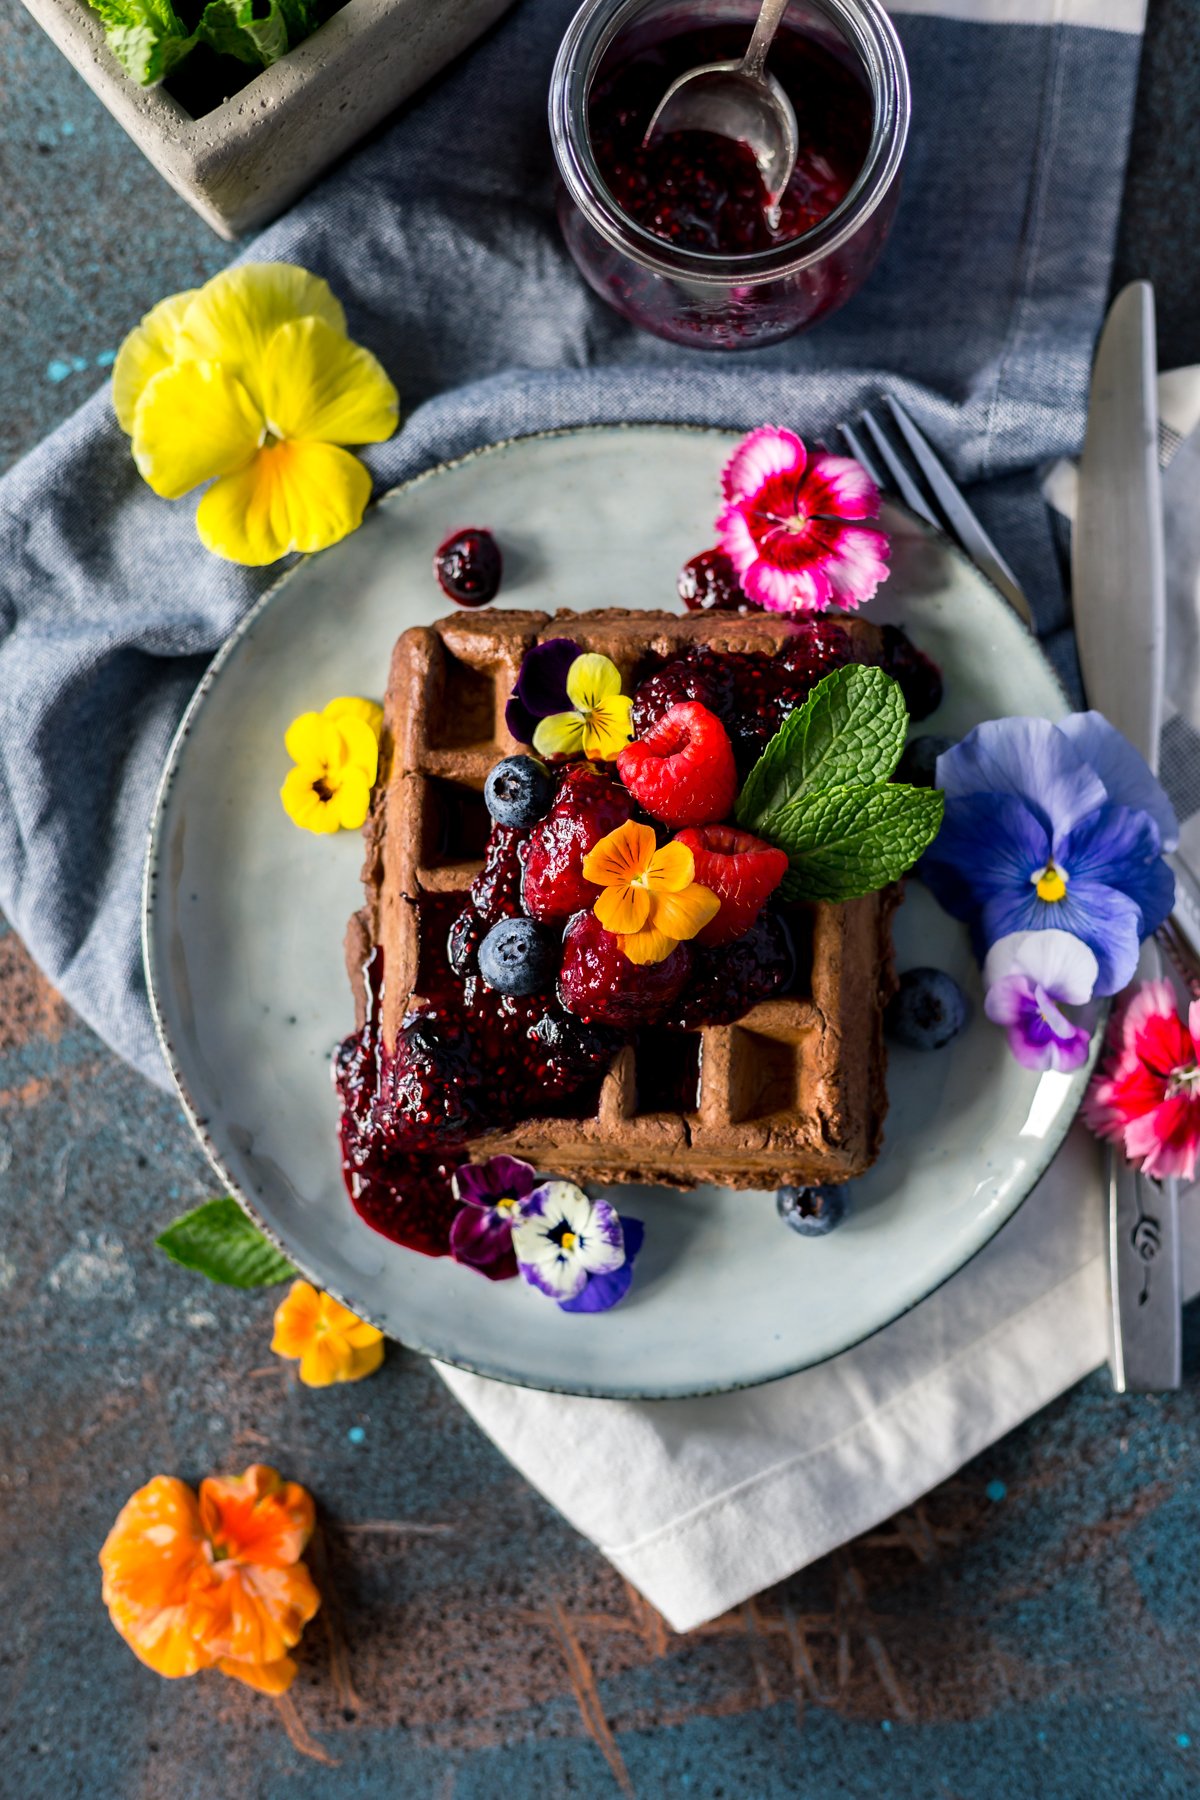 Breakfast or dessert? You decide when you whip up these sweet and savory waffle recipes! Dig into chocolate waffles with triple berry compote today! | asimplepantry.com